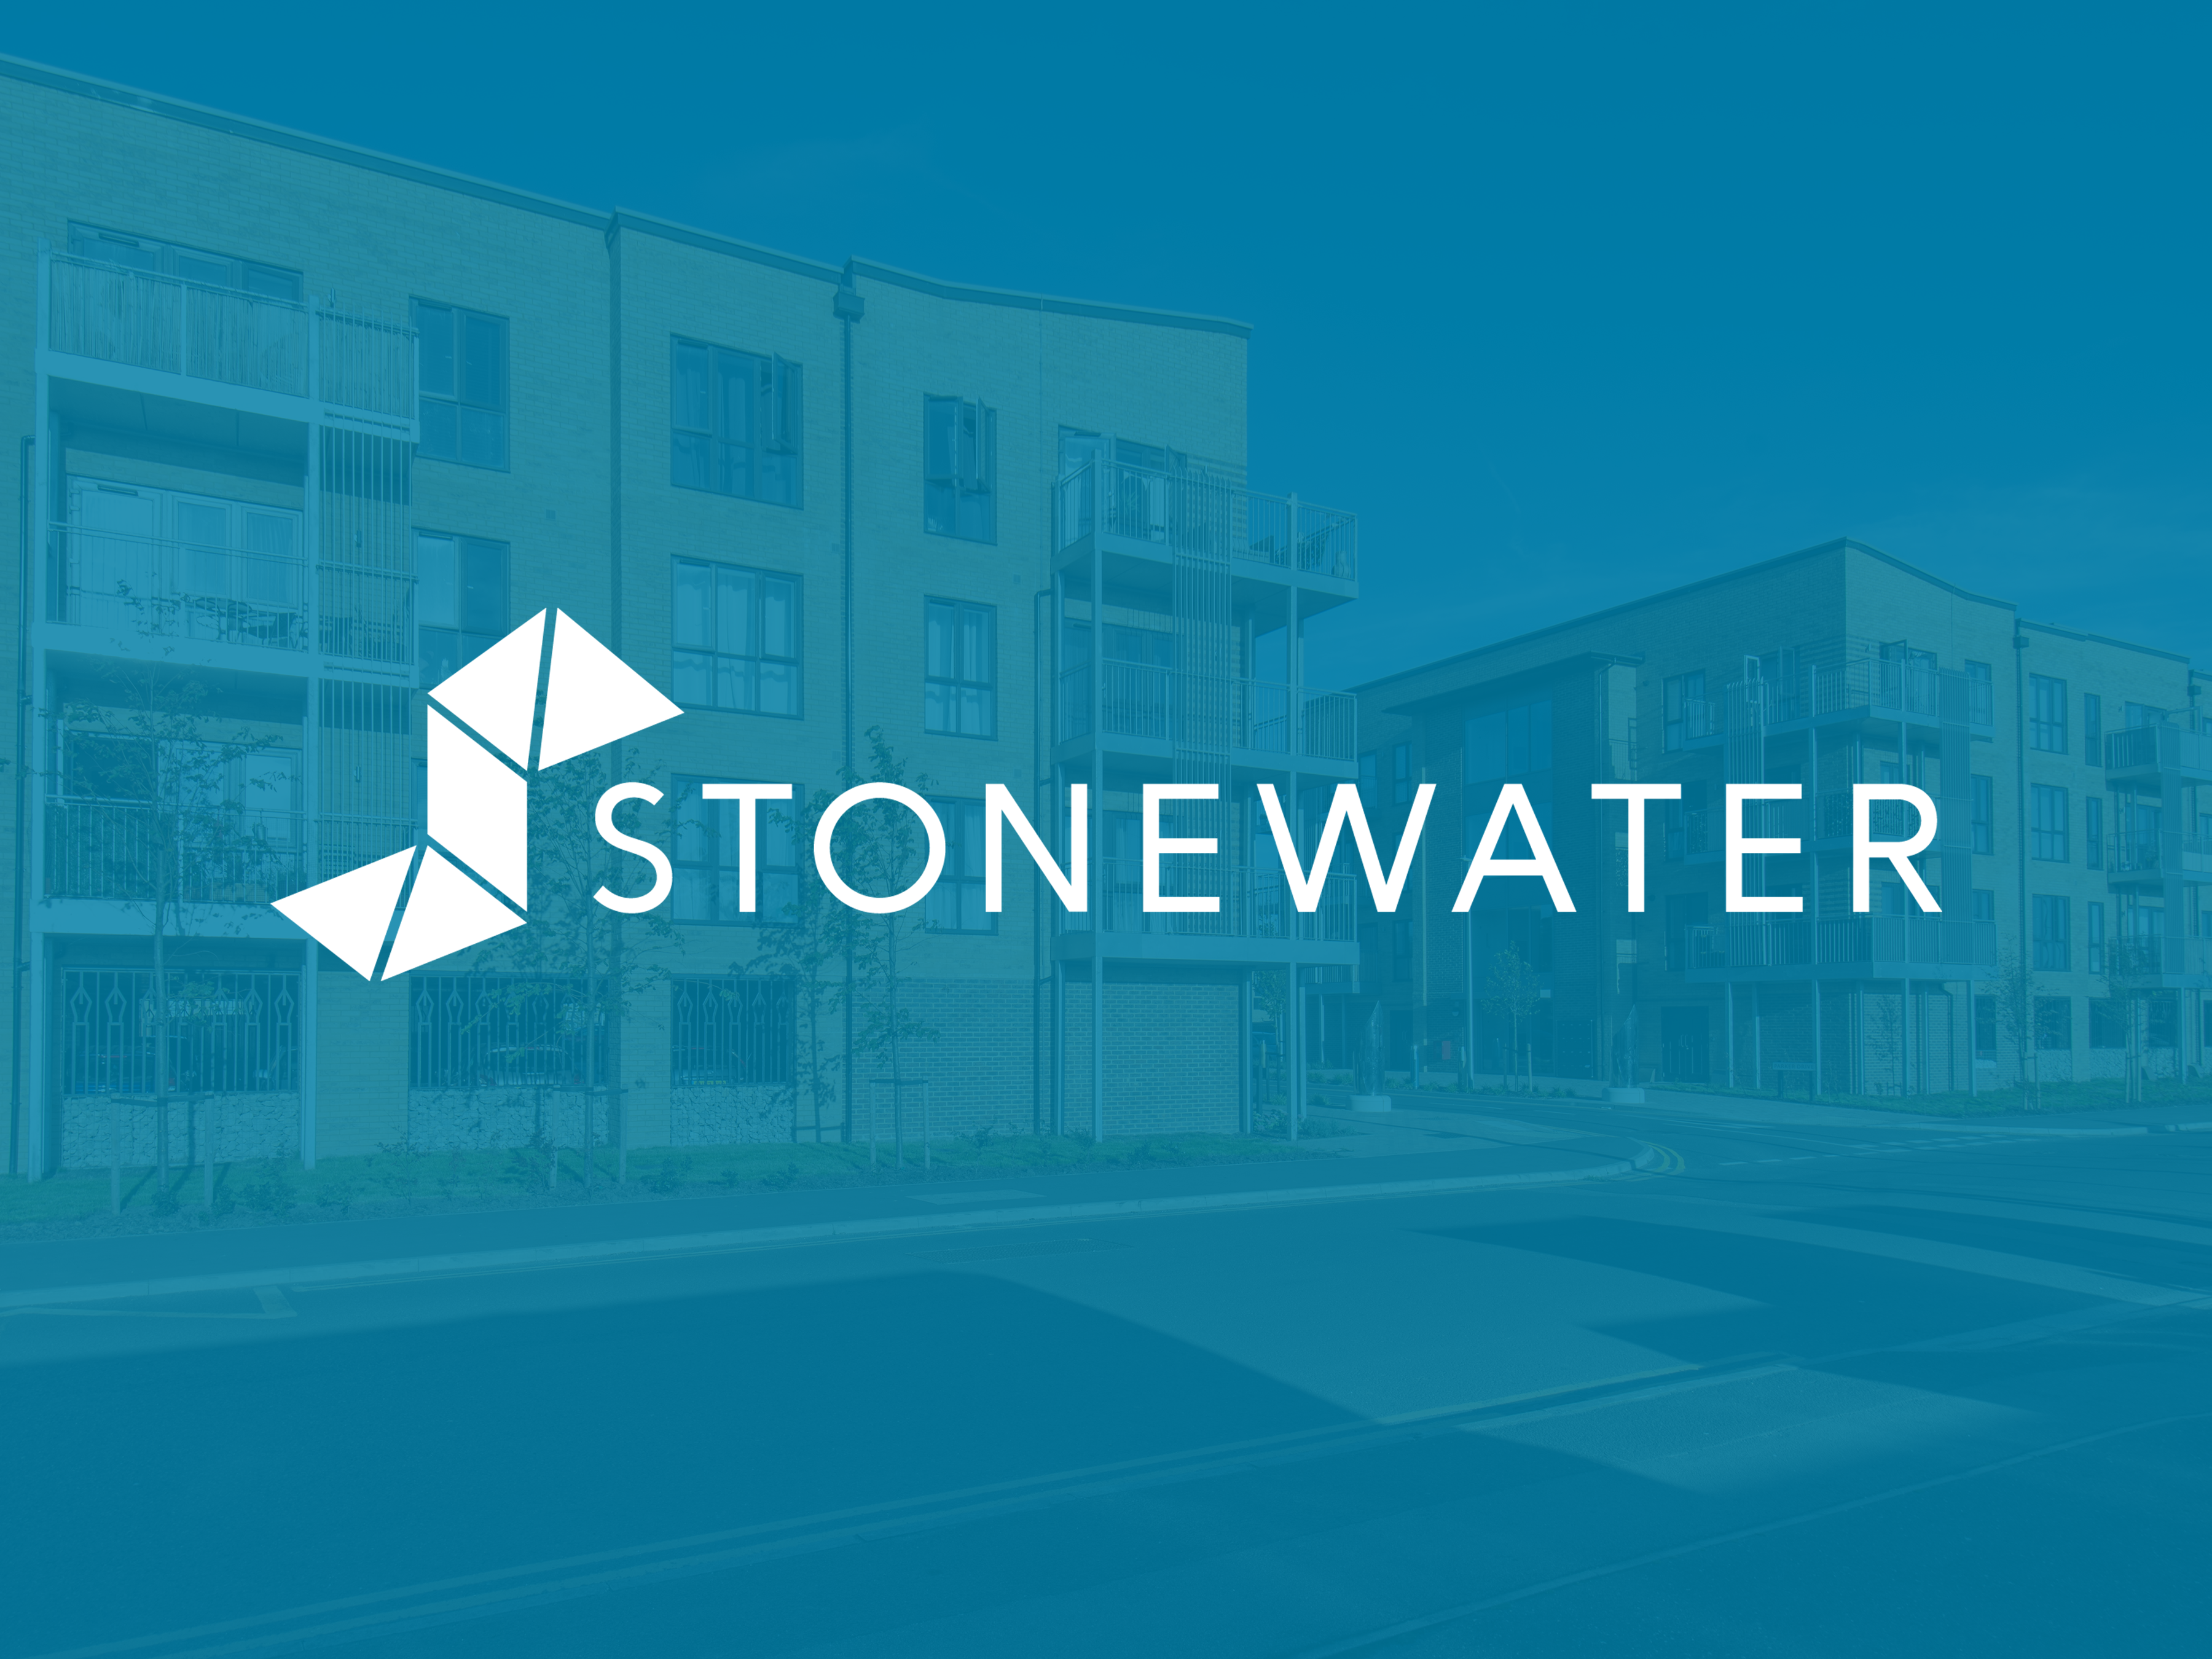 Stonewater logo super-imposed over street shot of new-build properties